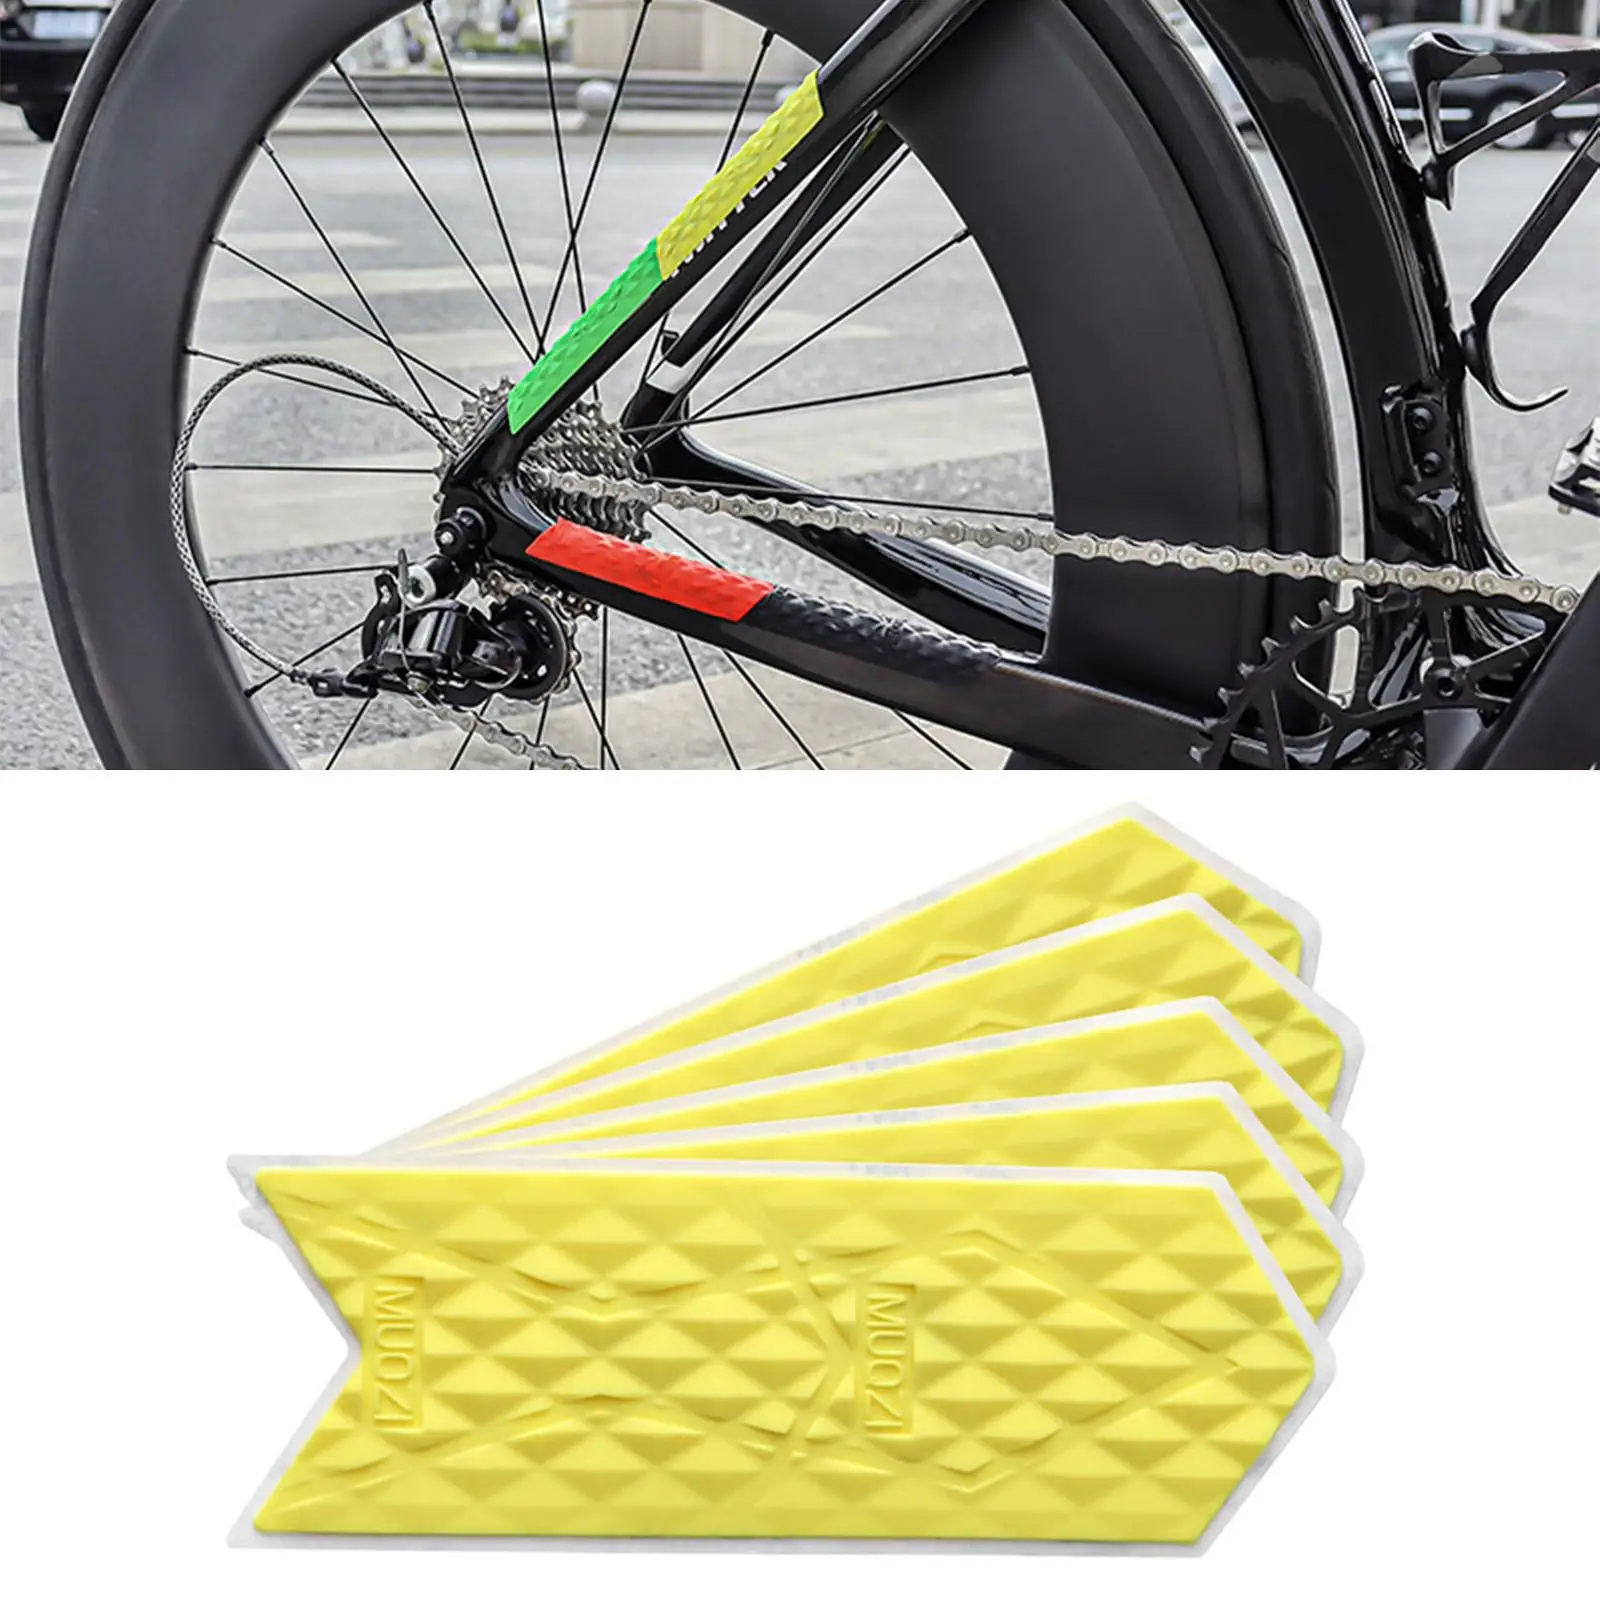 5pcs Bike Frame Protector Sticker Anti Scratch Bike Frame Protection Tape Decal Bike  Protective Sticker for Bicycle